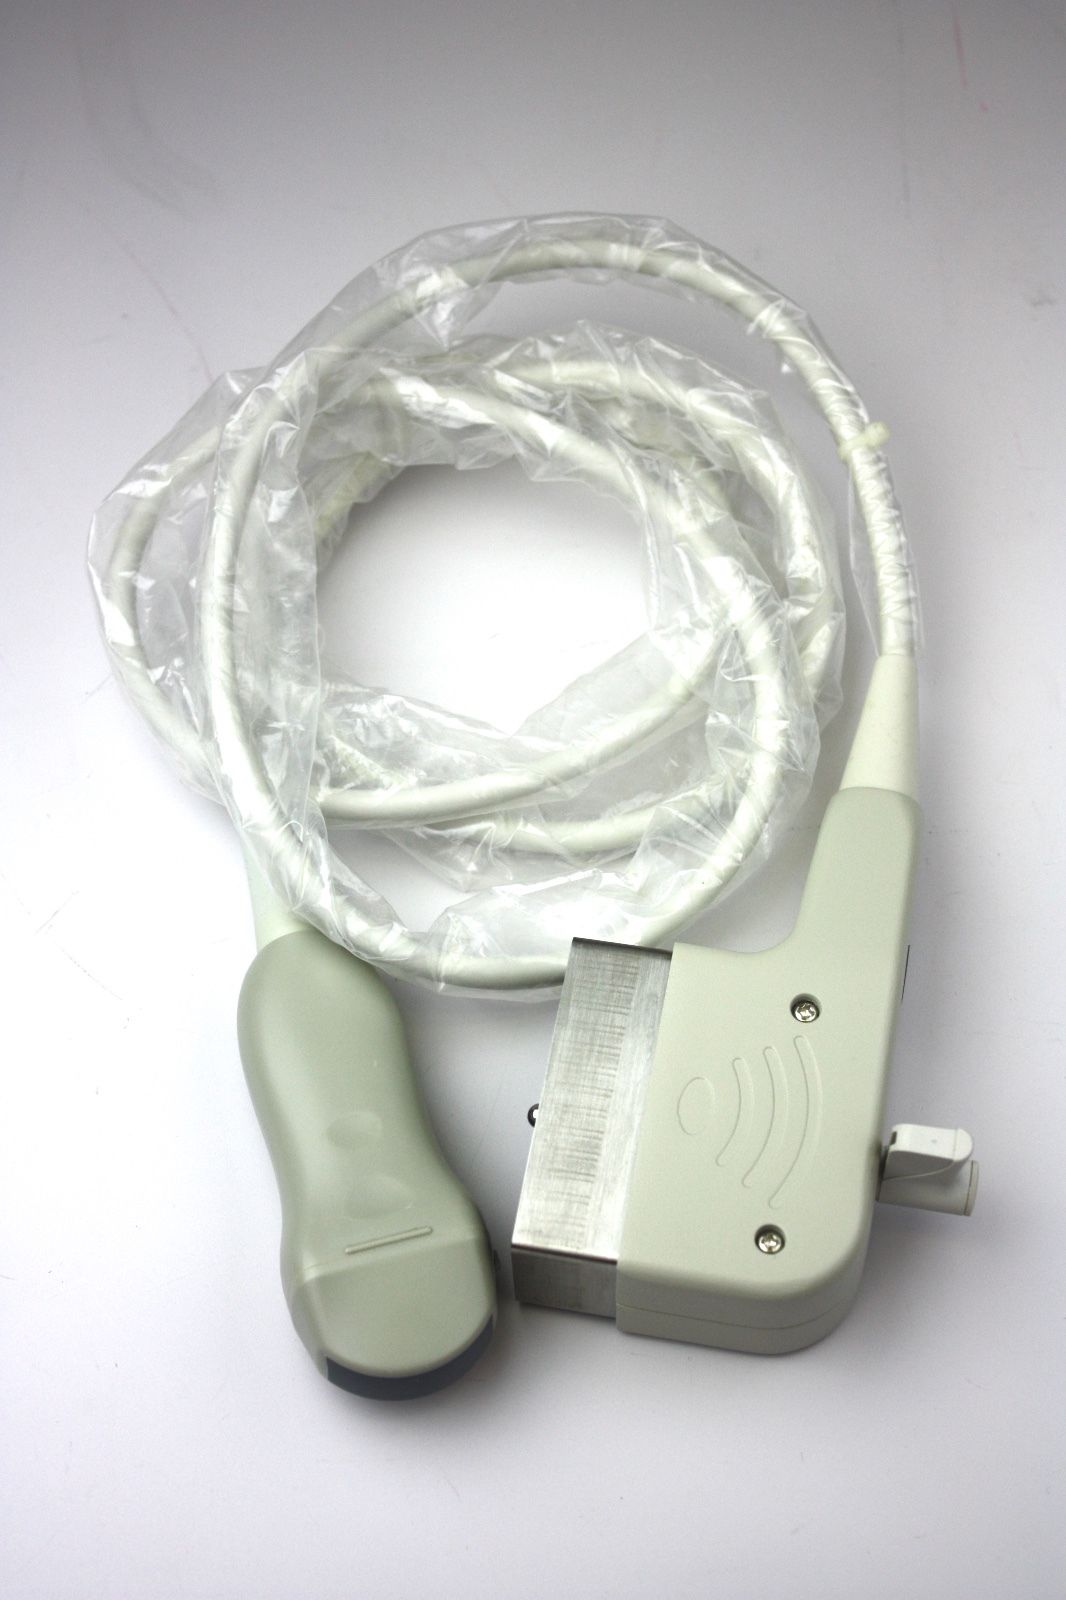 6.5C20B6 Micro Convex Probe, 6.5MHz, For Kaixin KX5600 Ultrasounds DIAGNOSTIC ULTRASOUND MACHINES FOR SALE